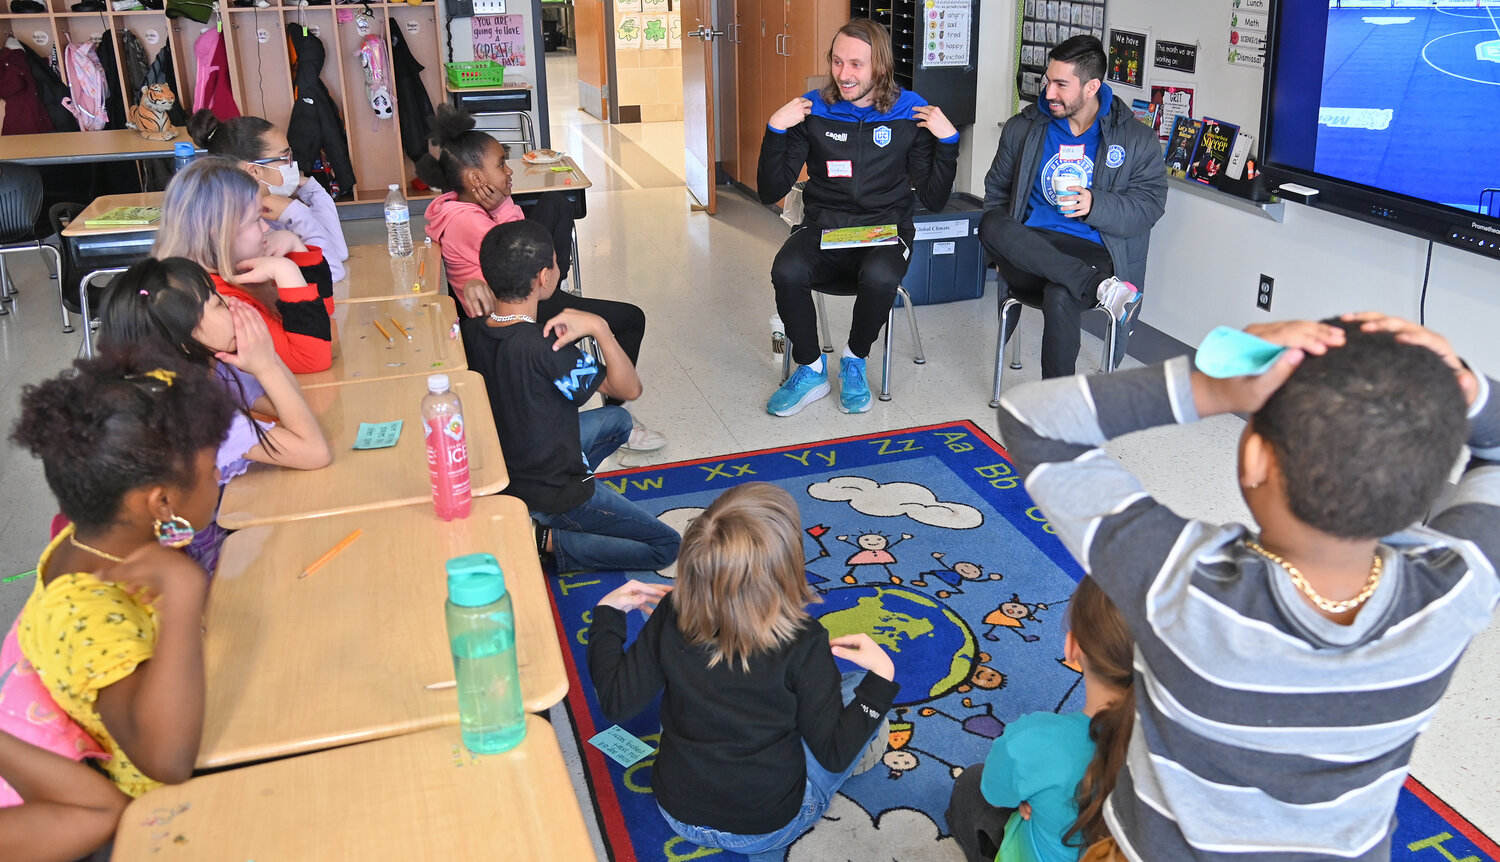 ‘SIMON SAYS’ — Utica City FC player Timmy Goldman plays “Simon Says” with the third grade class of Jordan Penc before reading the book “Game Time” during the inaugural Community Reader’s Day event on Friday morning at Kernan Elementary School in Utica. Helping him is teammate Rafa Godoi.